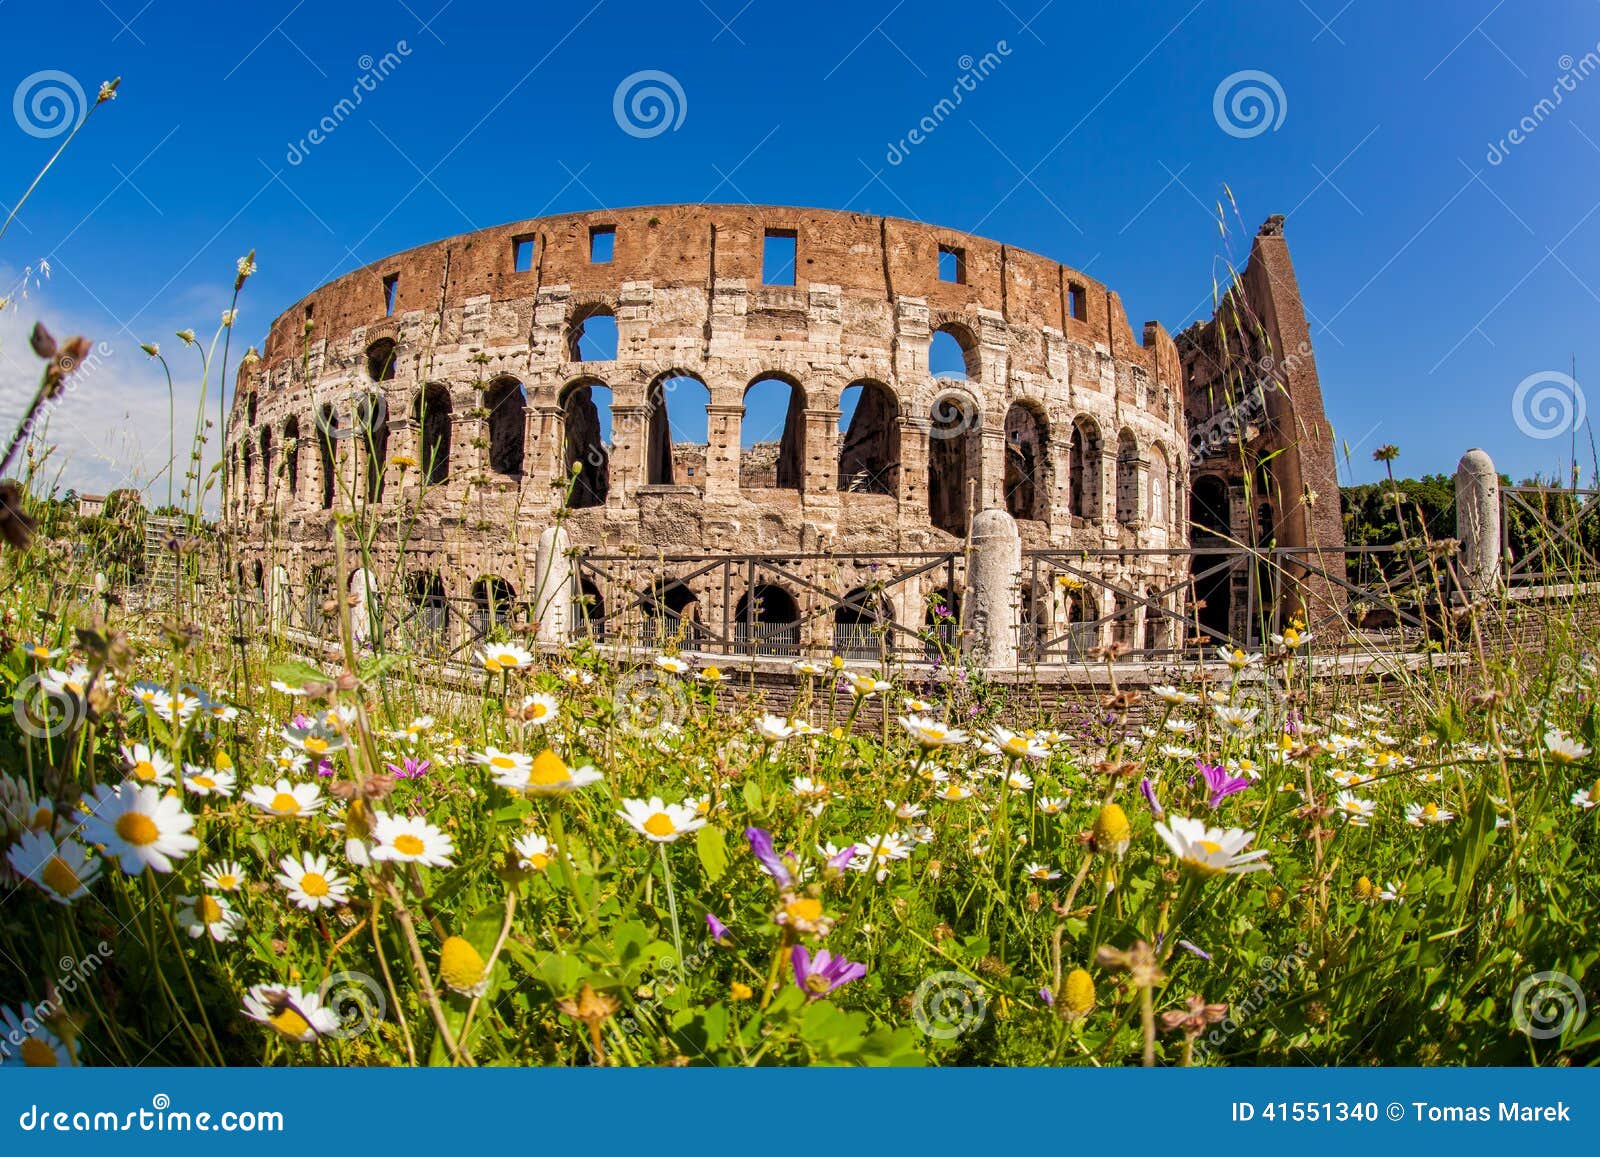 Colosseum During Spring Time, Rome, Italy Stock Photo  Image: 41551340